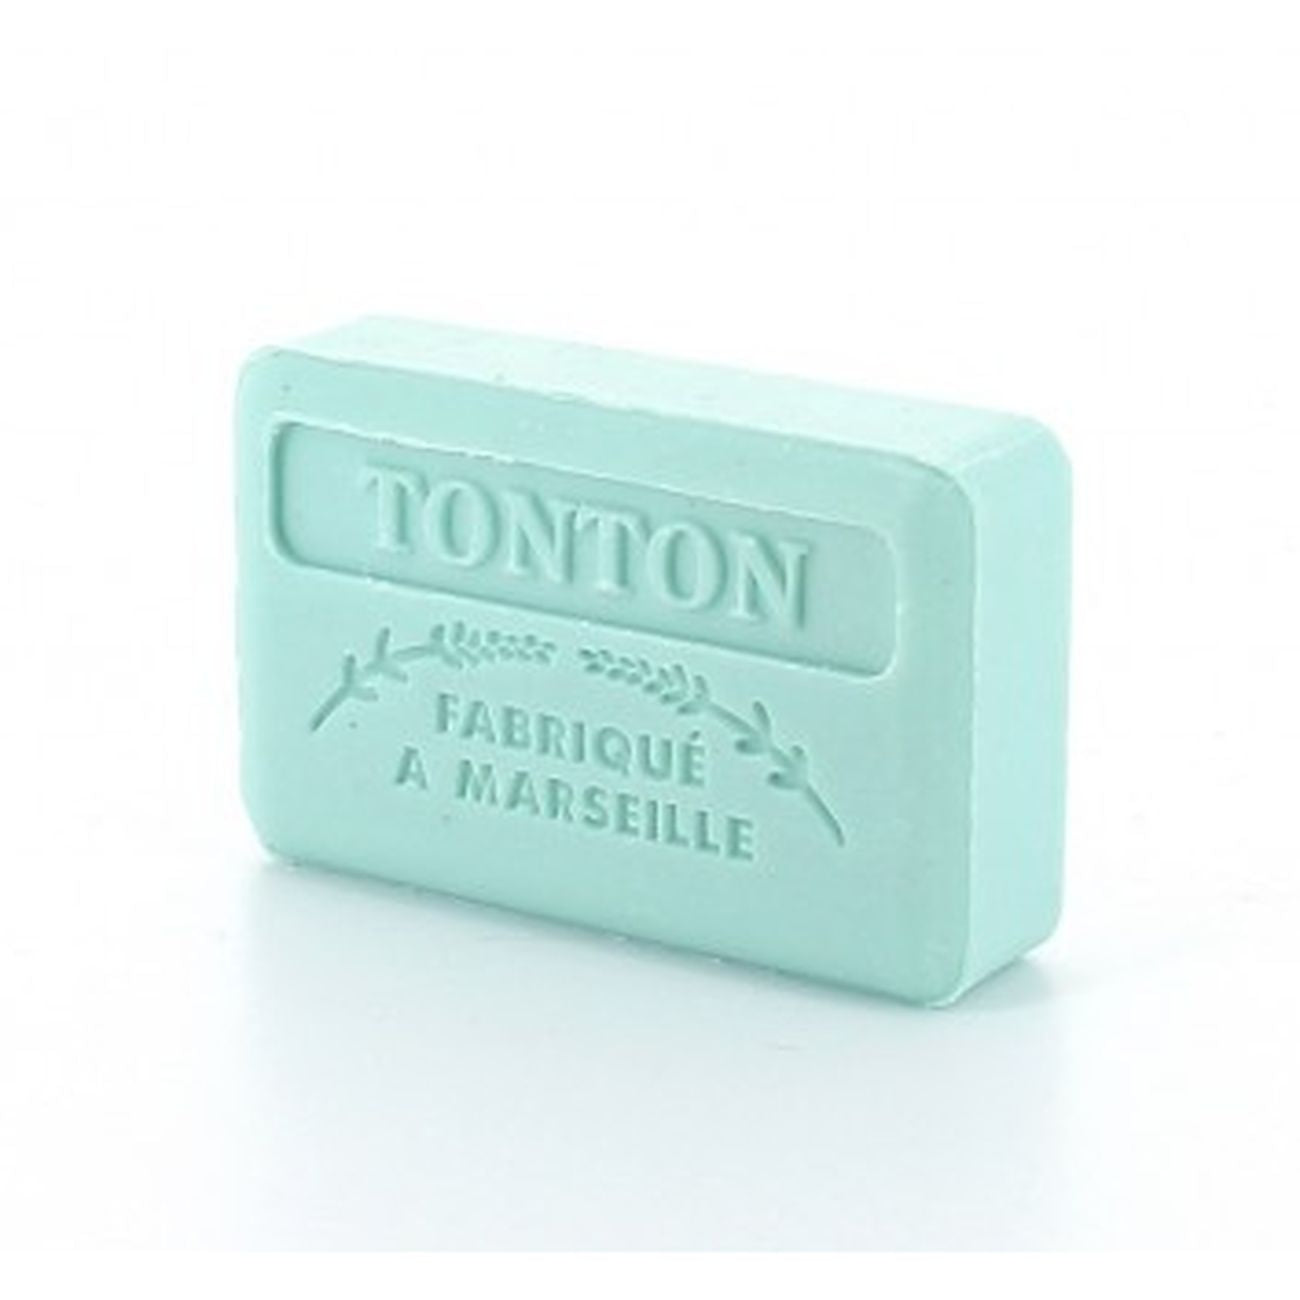 French Marseille Soap Family Tonton (Uncle) 125g